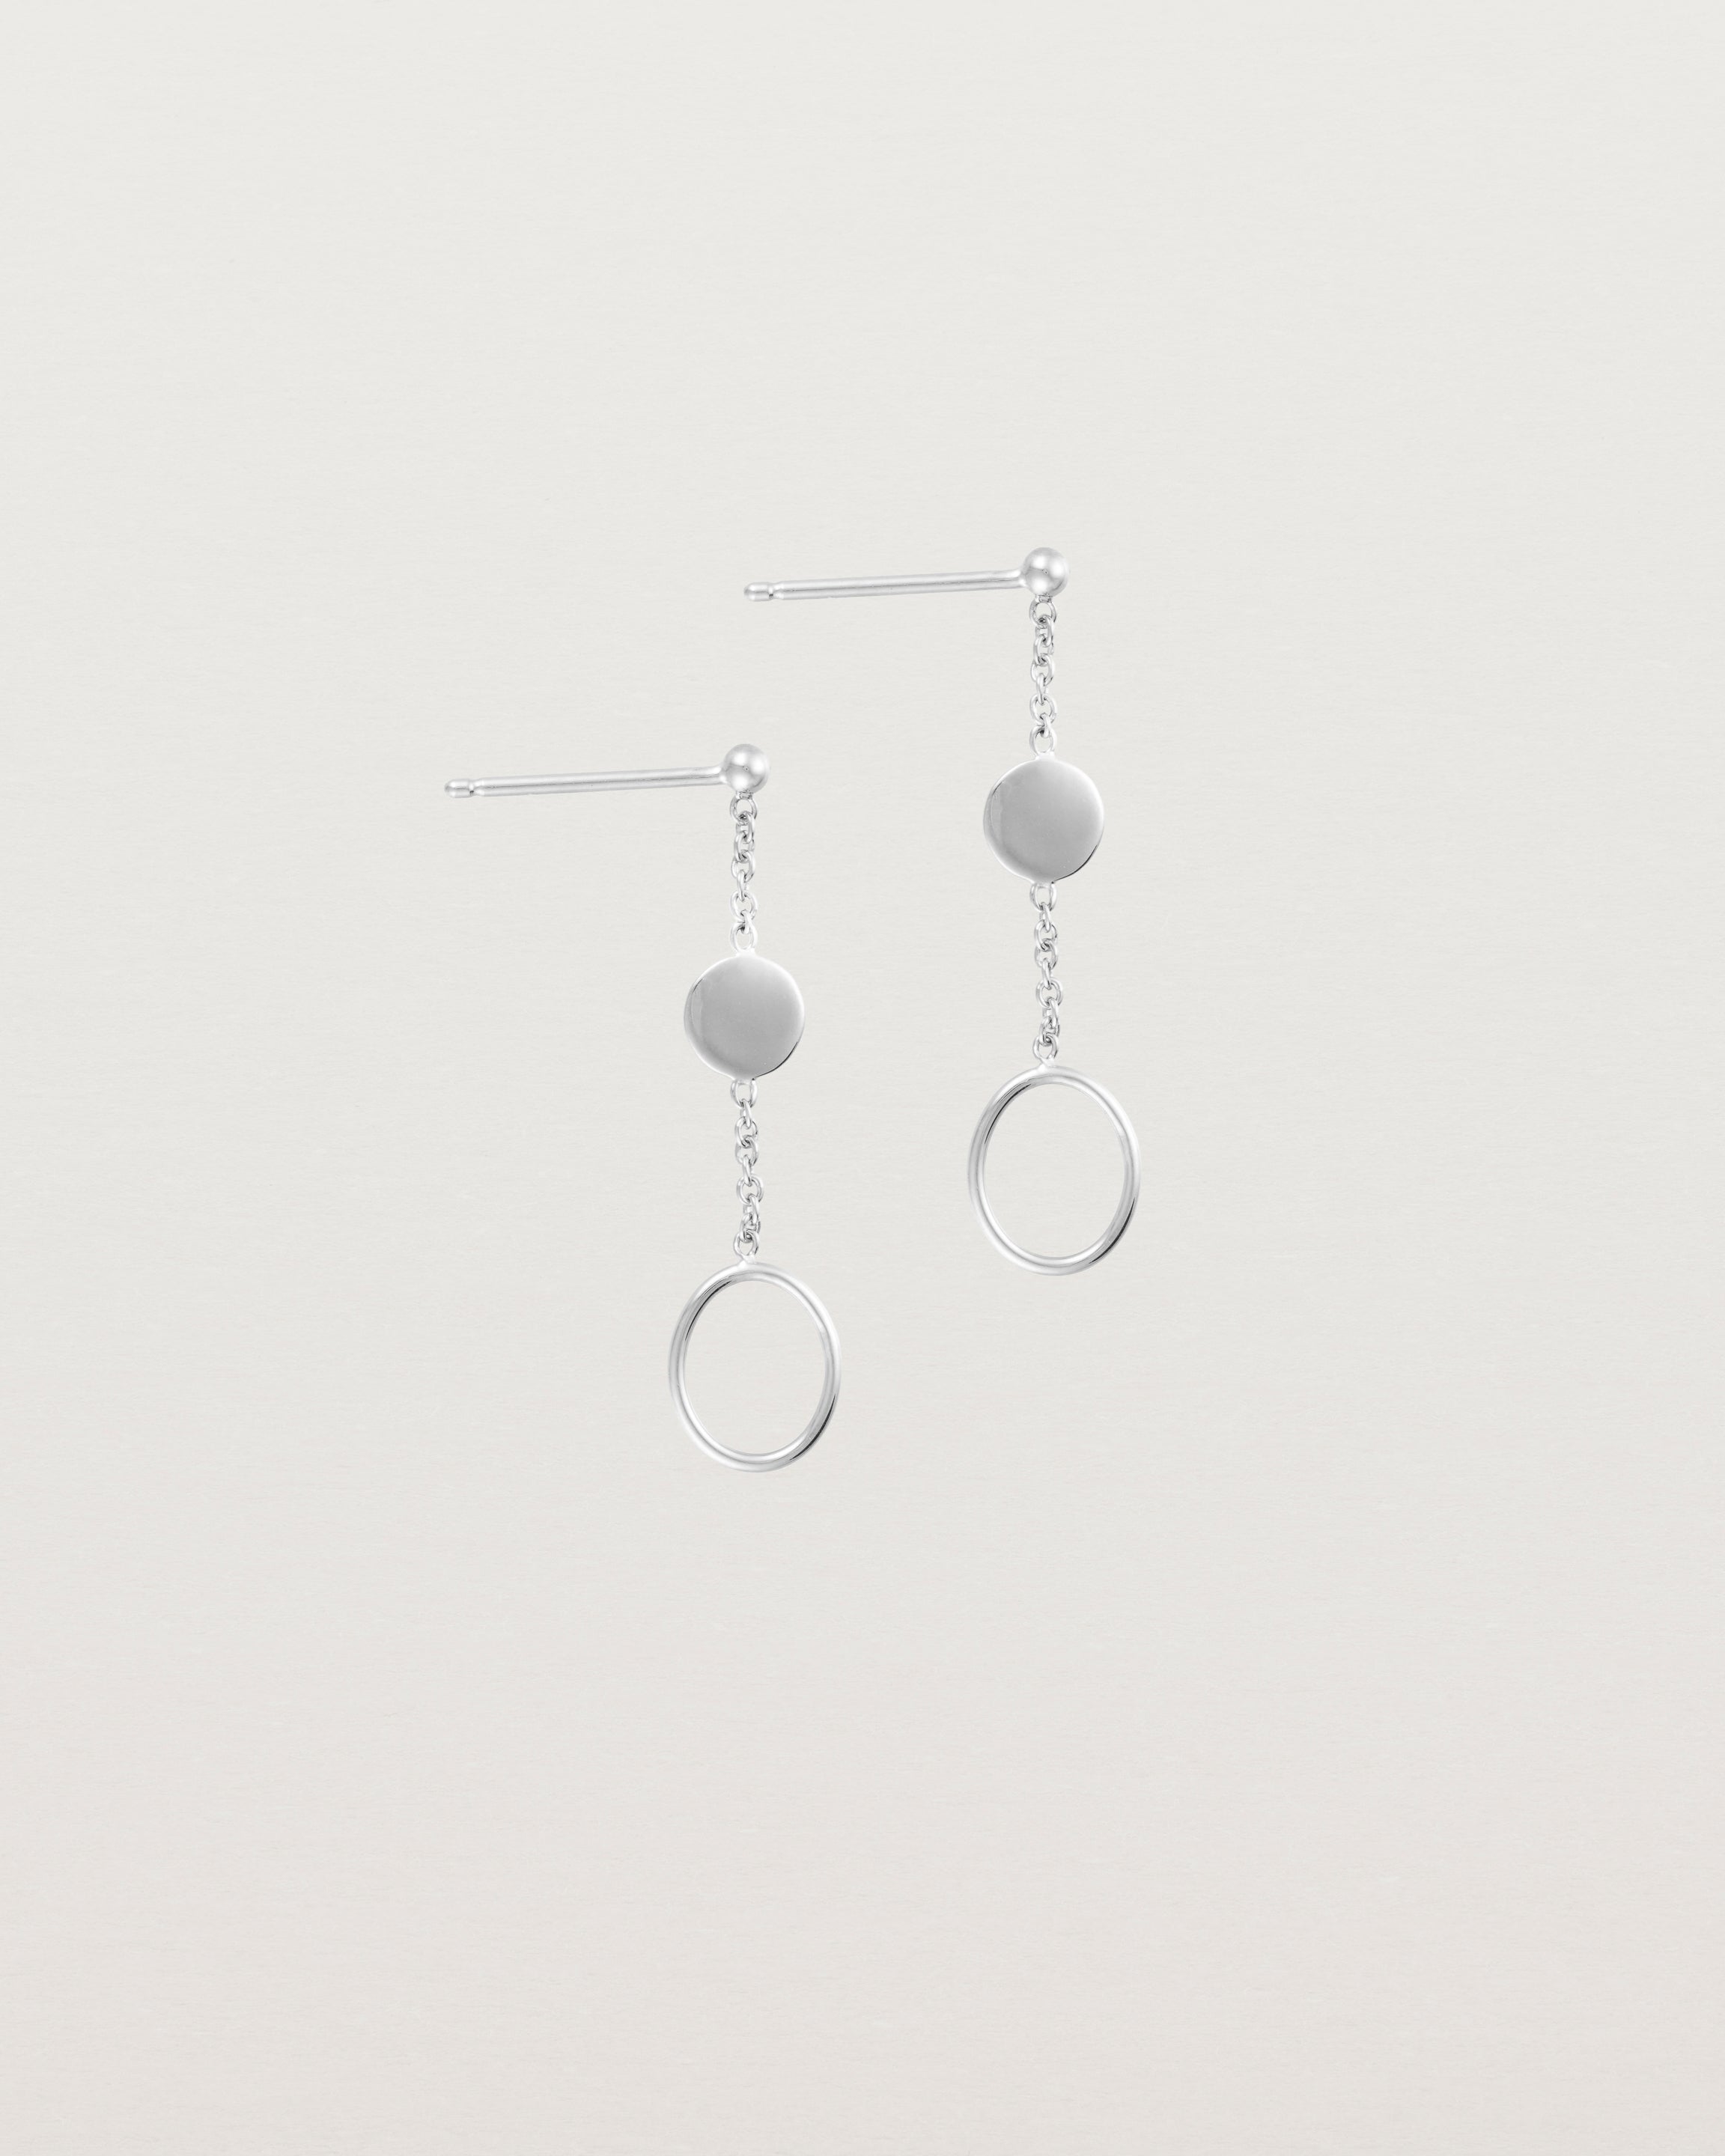 Hanging view of the Aiyana Earrings in White Gold.